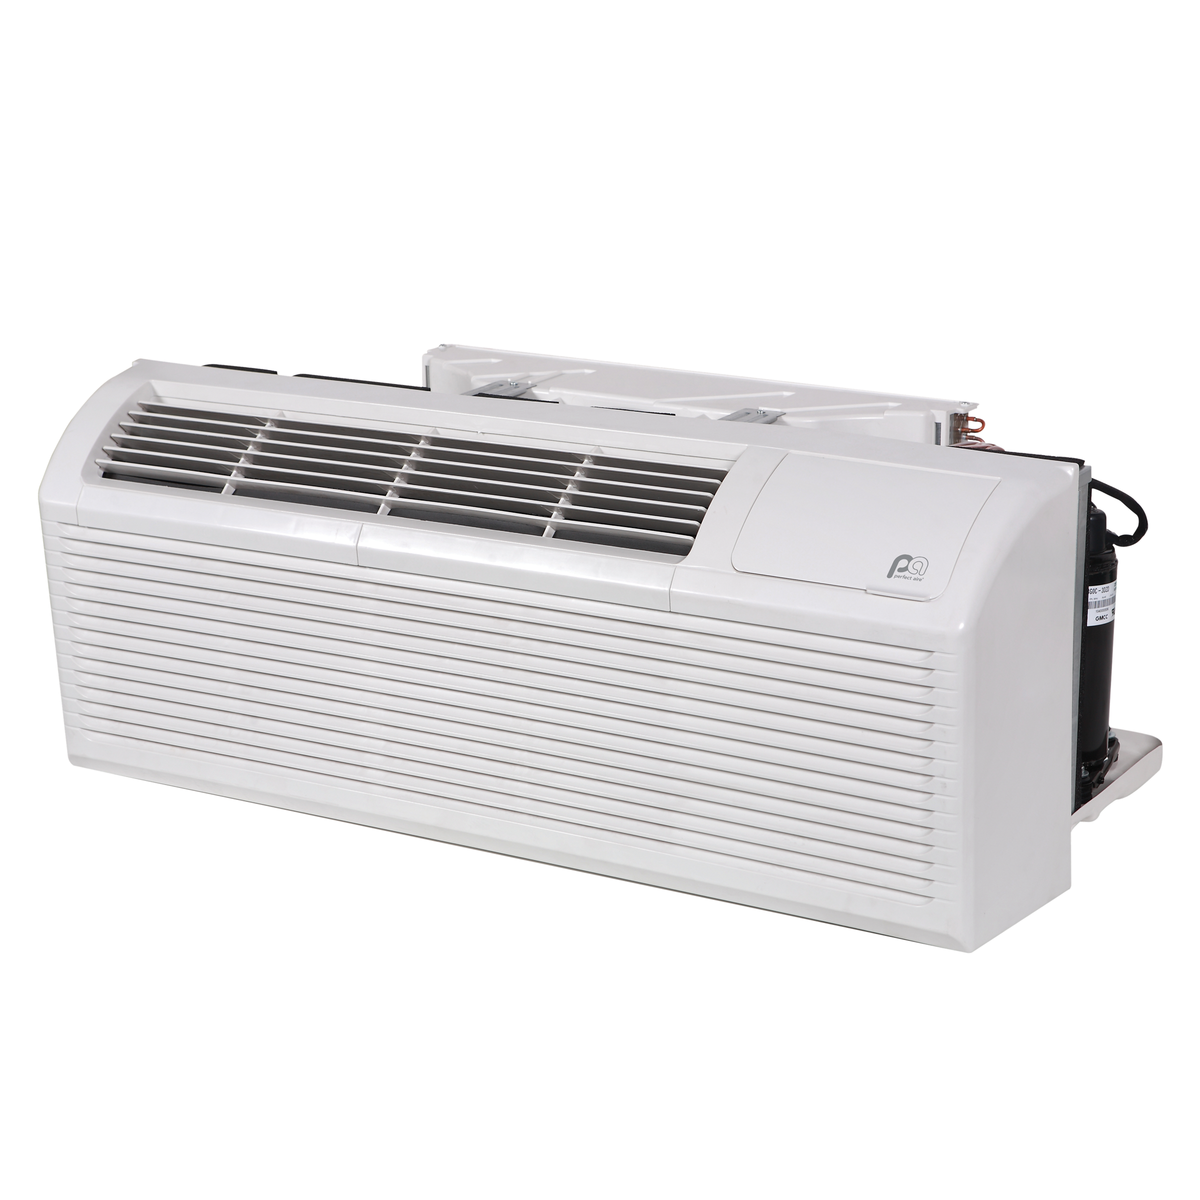 Beat the heat this summer with these portable AC units — save $120